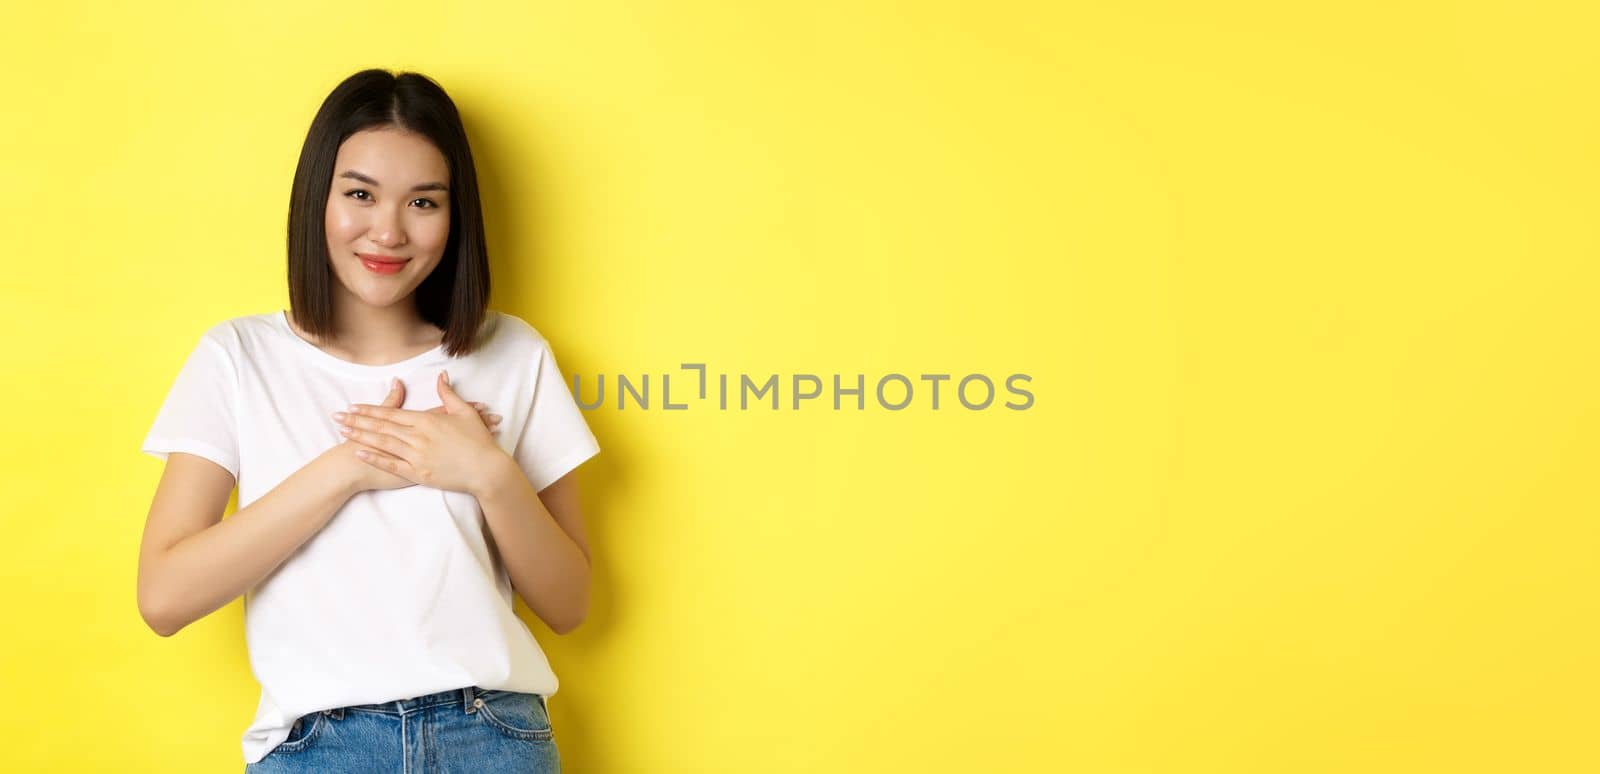 Beauty and fashion concept. Heartfelt asian girl holding hands on heart and smiling touched, thanking you, standing over yellow background.